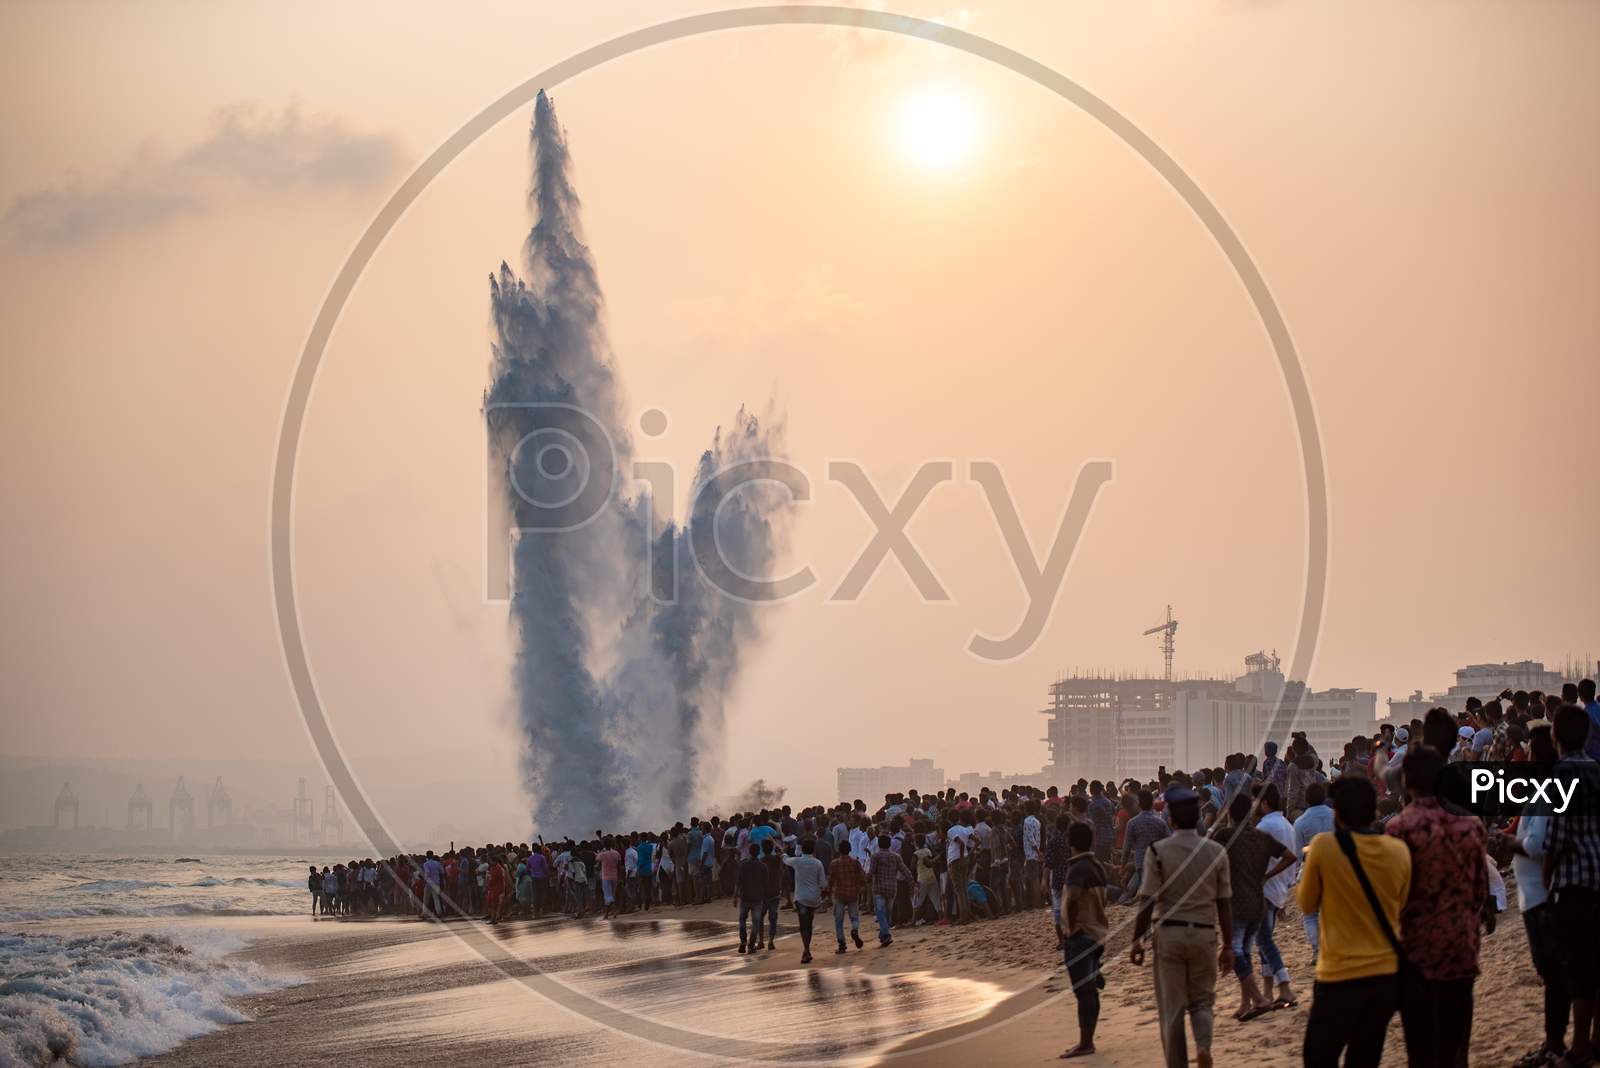 People watch an Explosion of a Dummy target by Indian Navy personnel on Navy Day in Visakhapatnam, Dec 4,2019